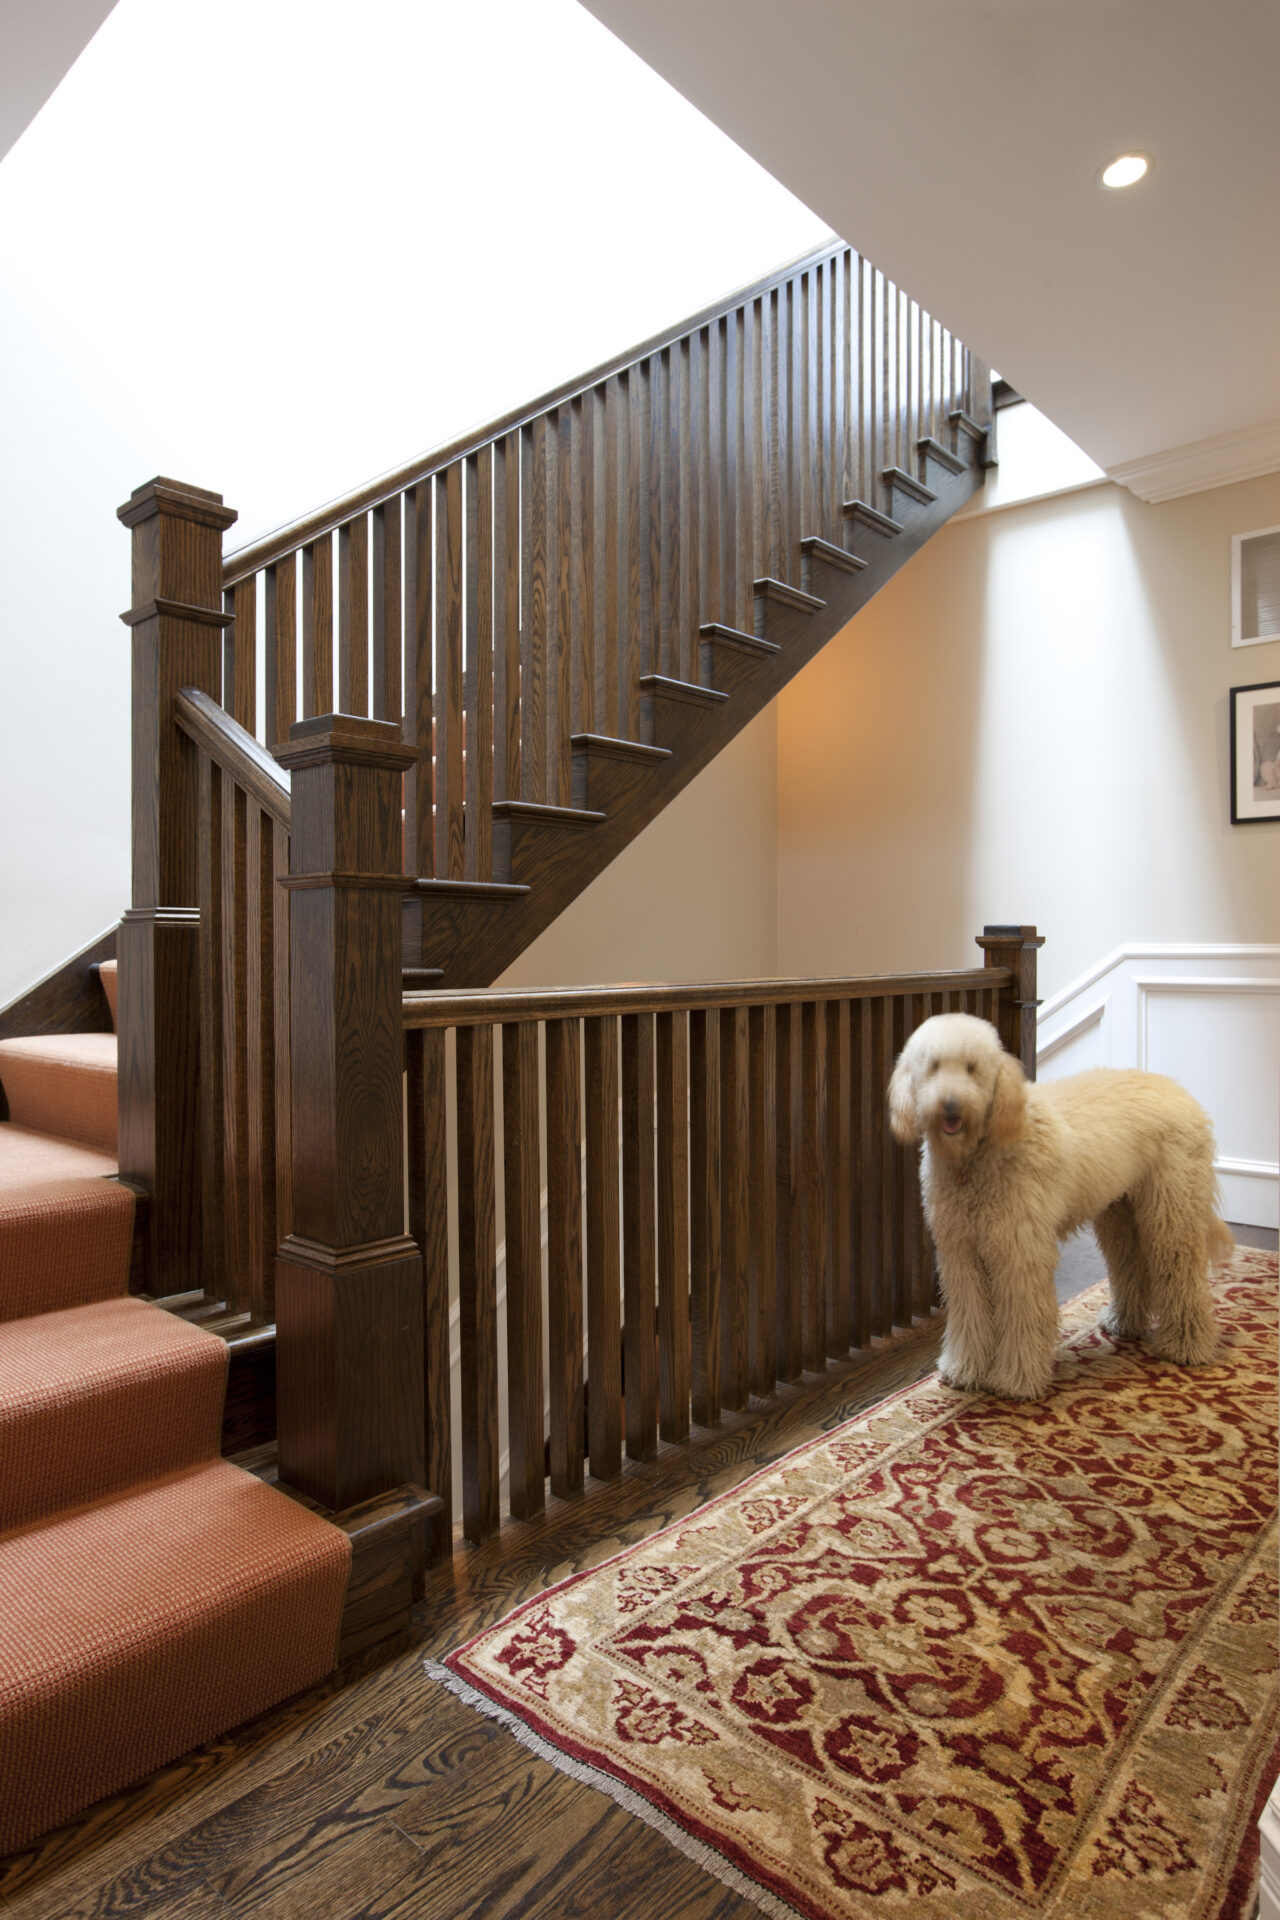 Wooden stairs with big dog on the carpet